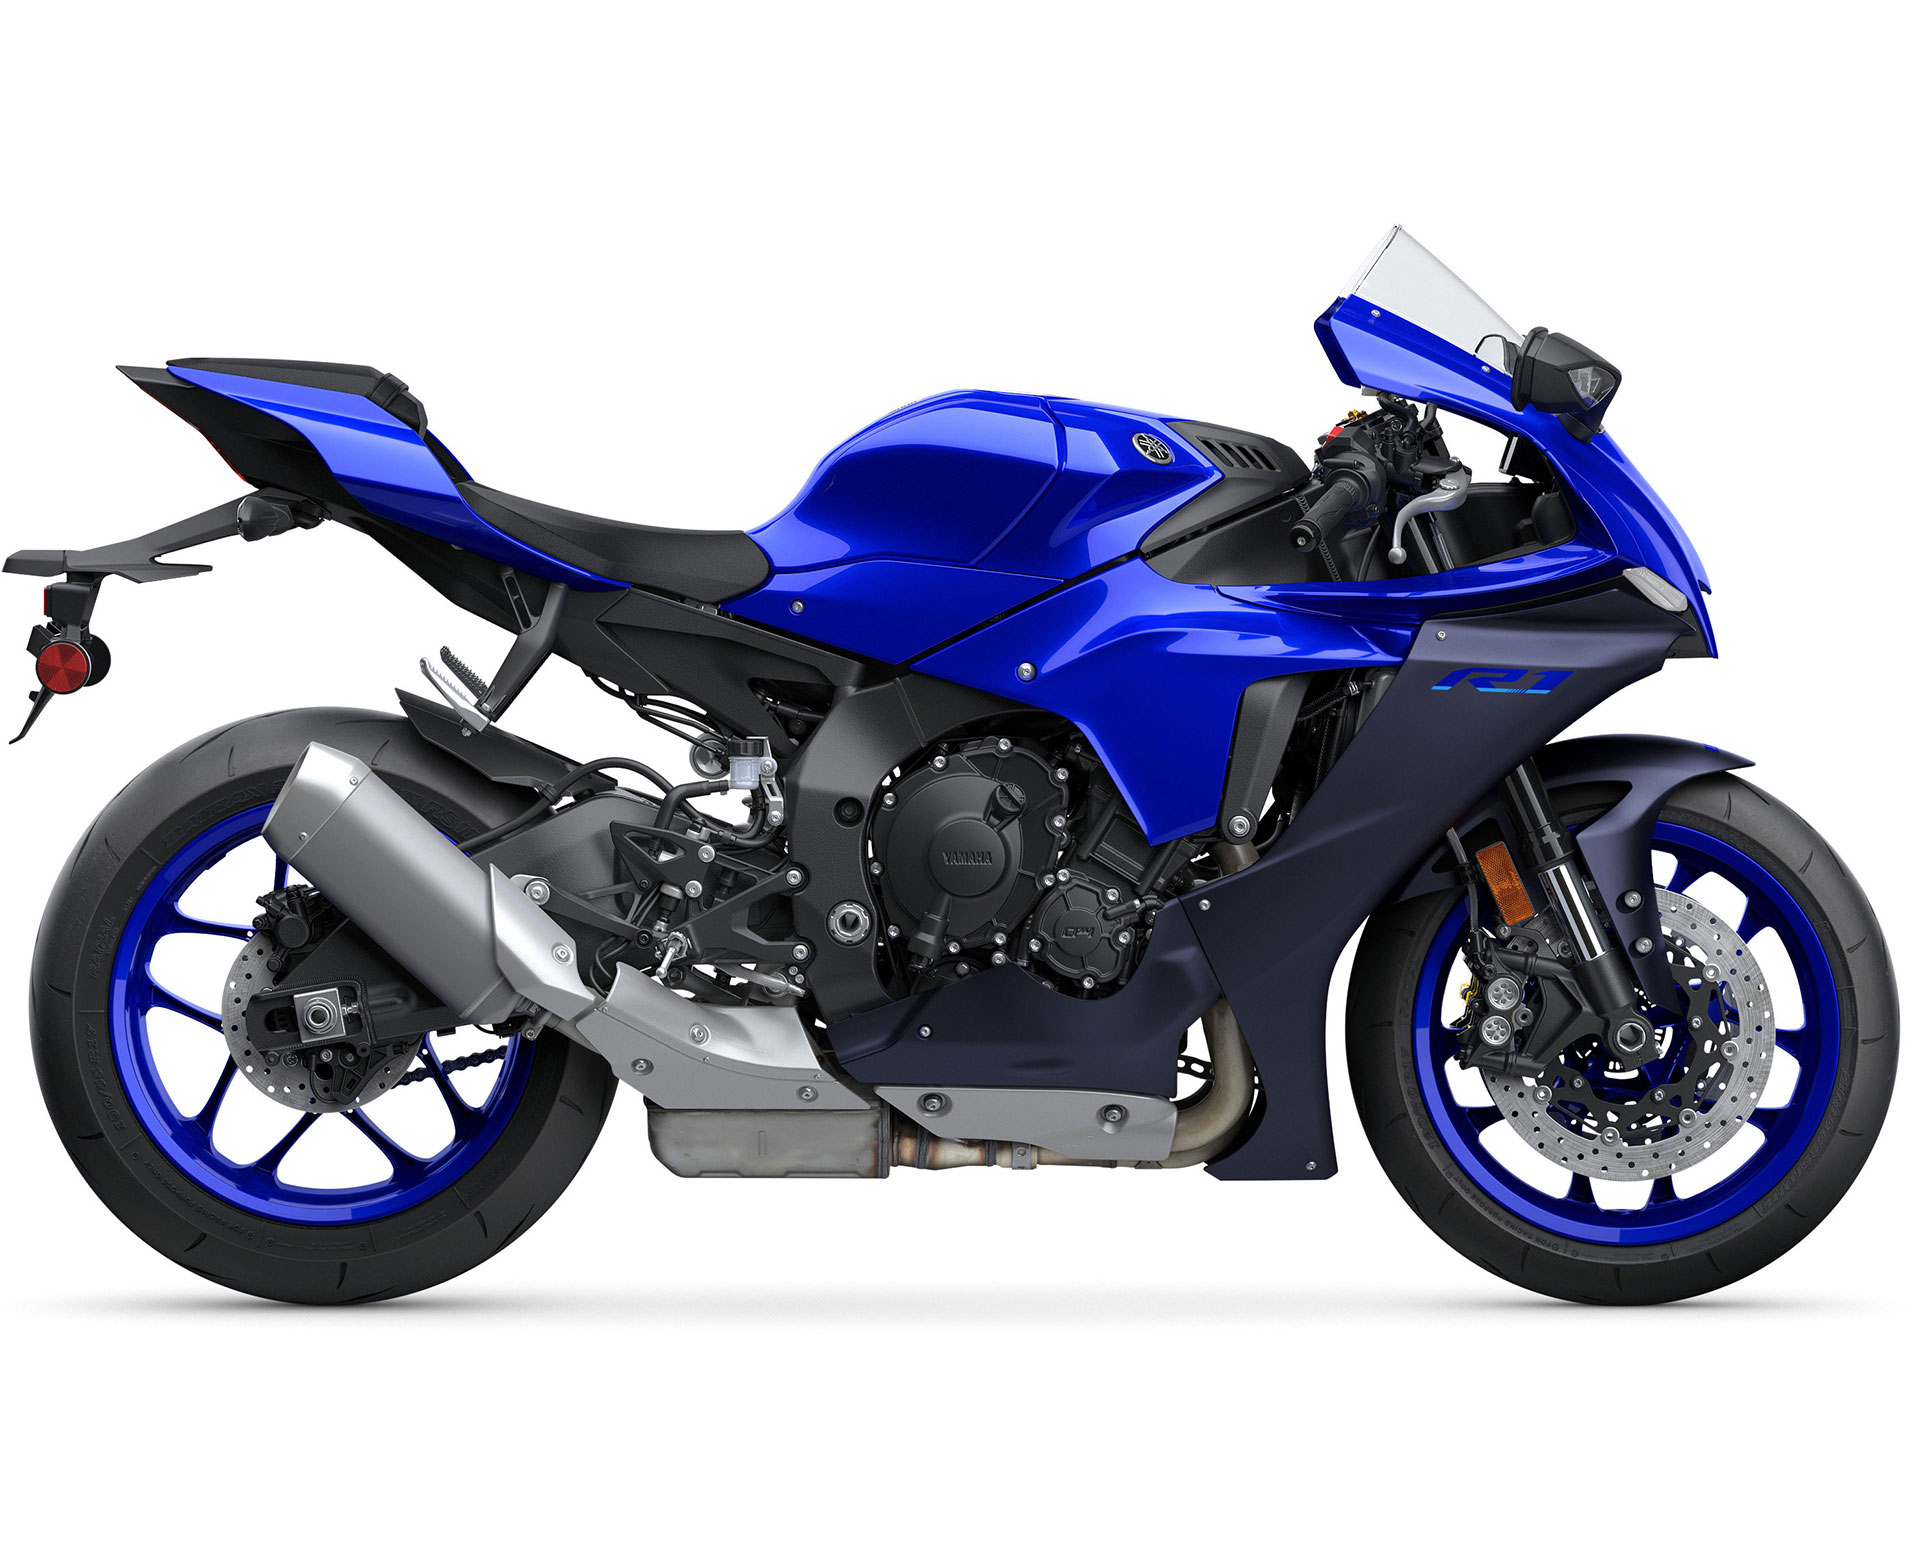 Thumbnail of your customized 2023 YZF-R1